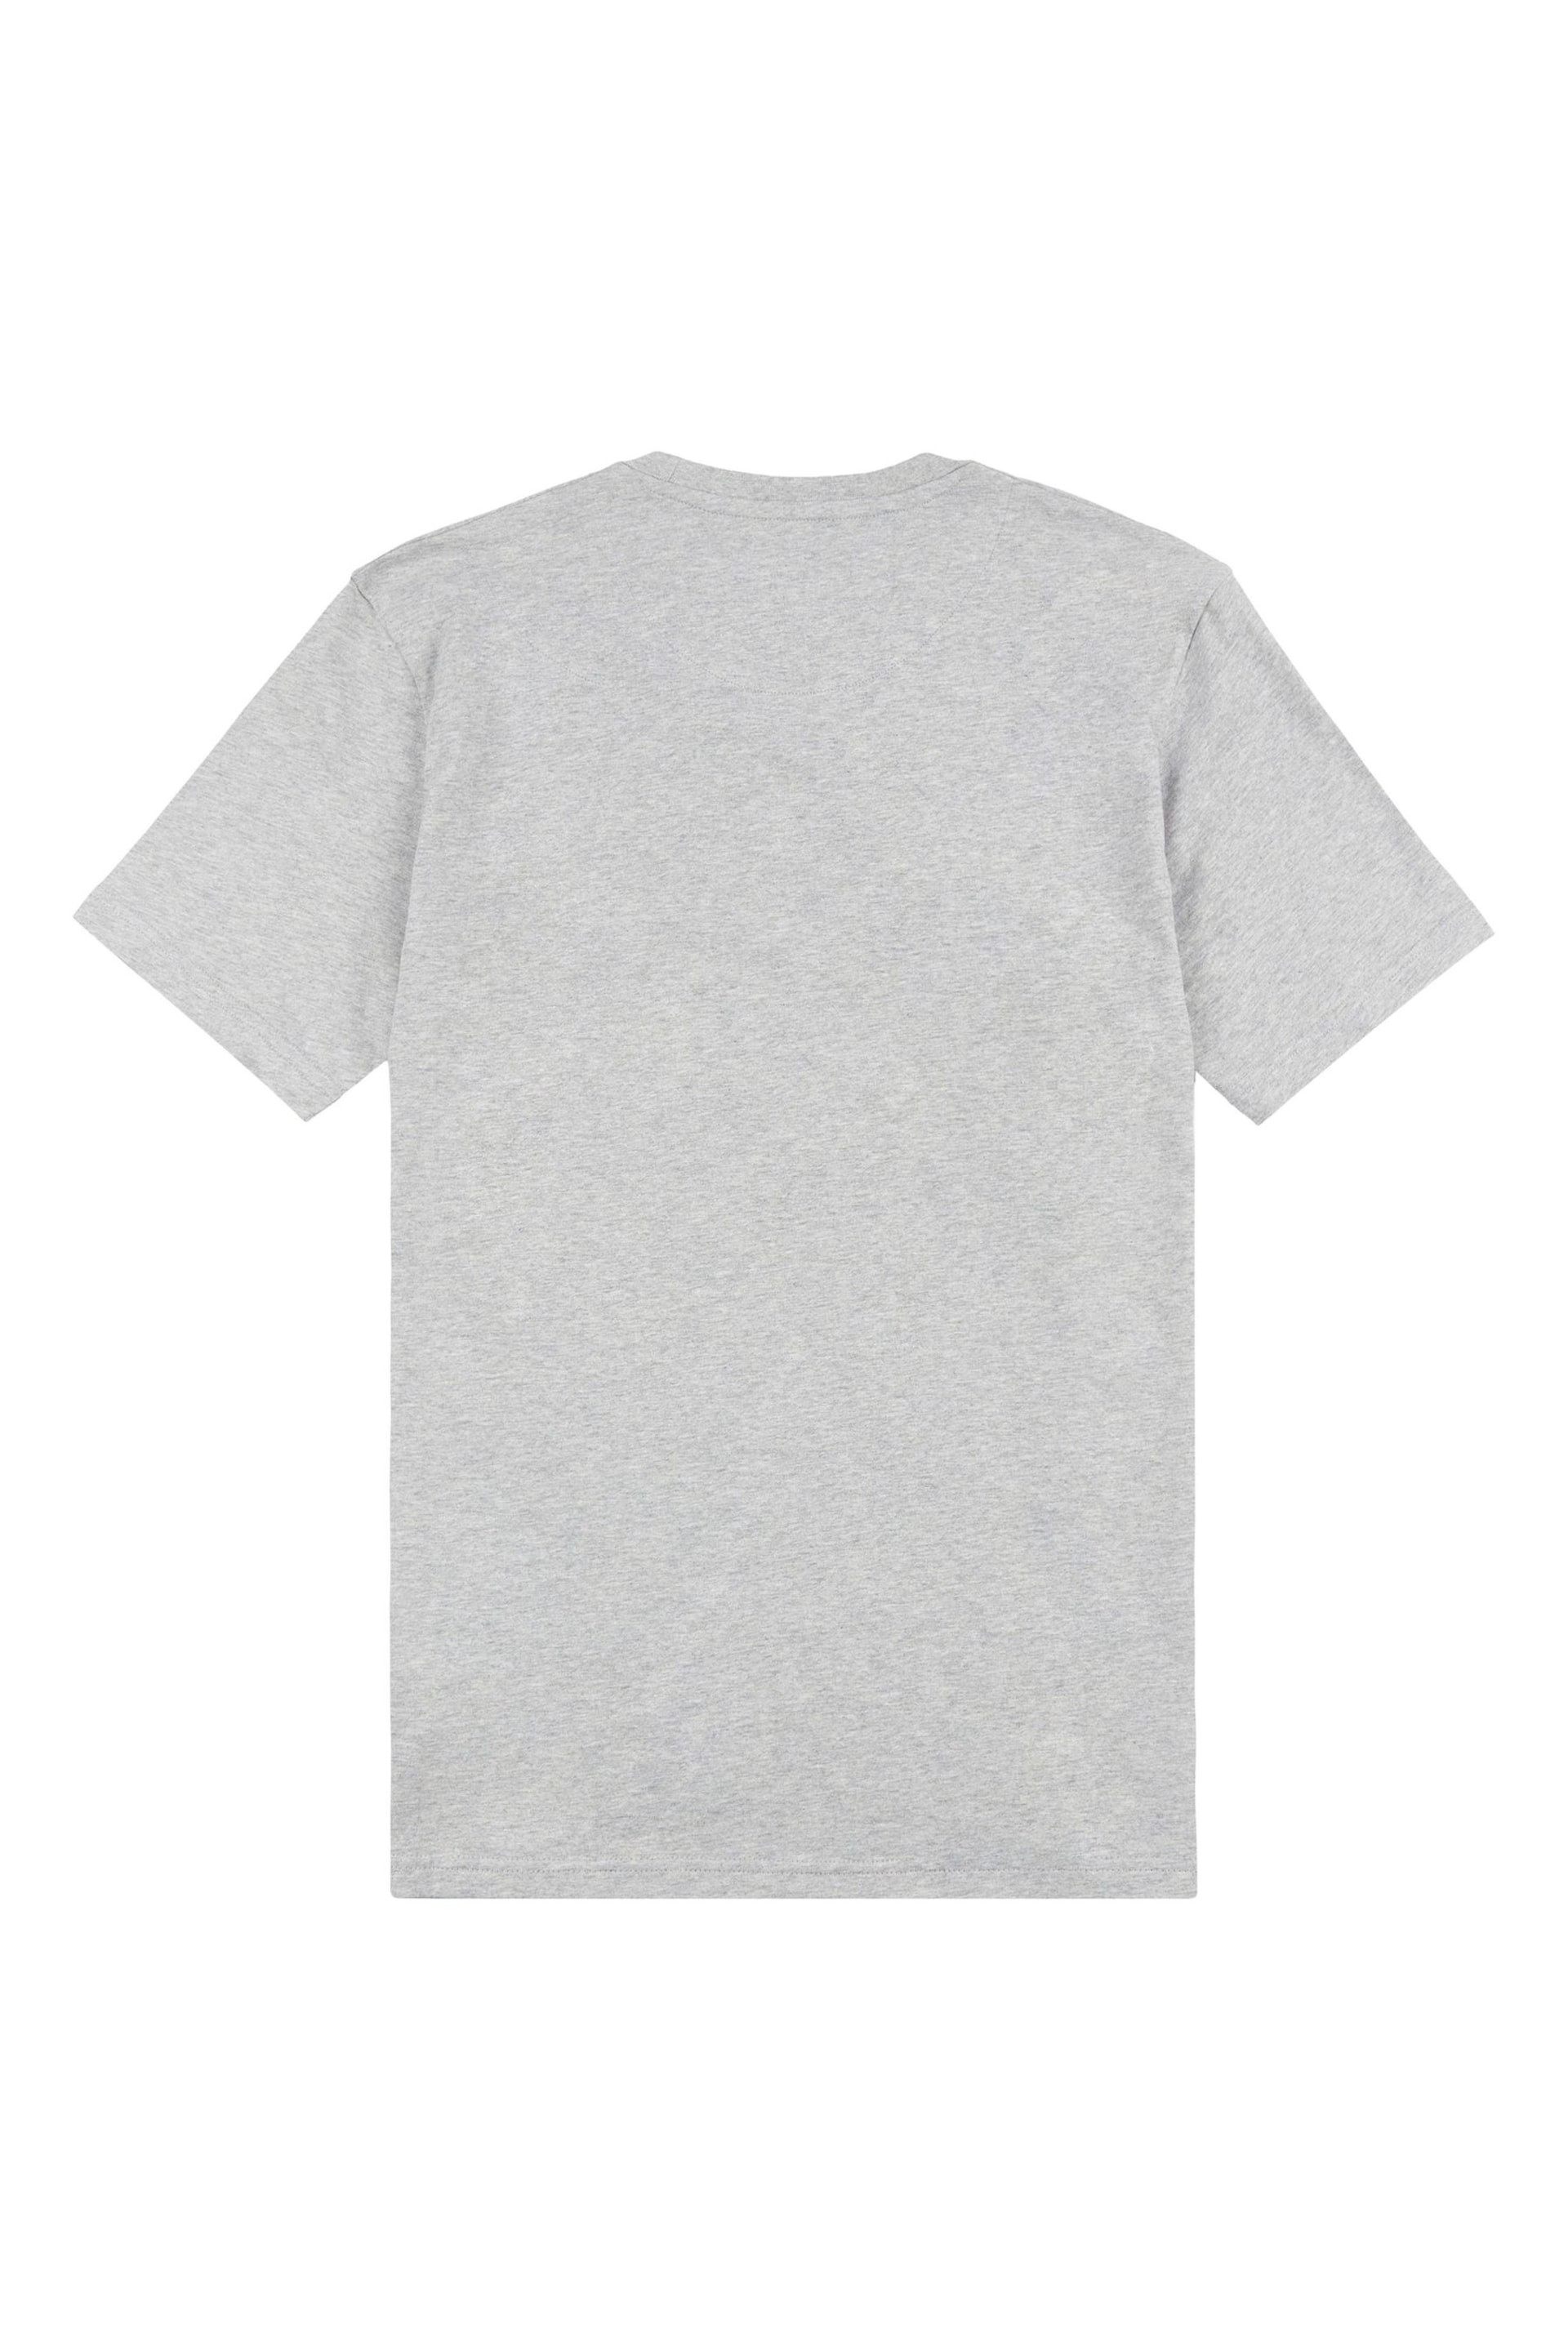 Flyers Mens Classic Fit T-Shirt - Image 7 of 8